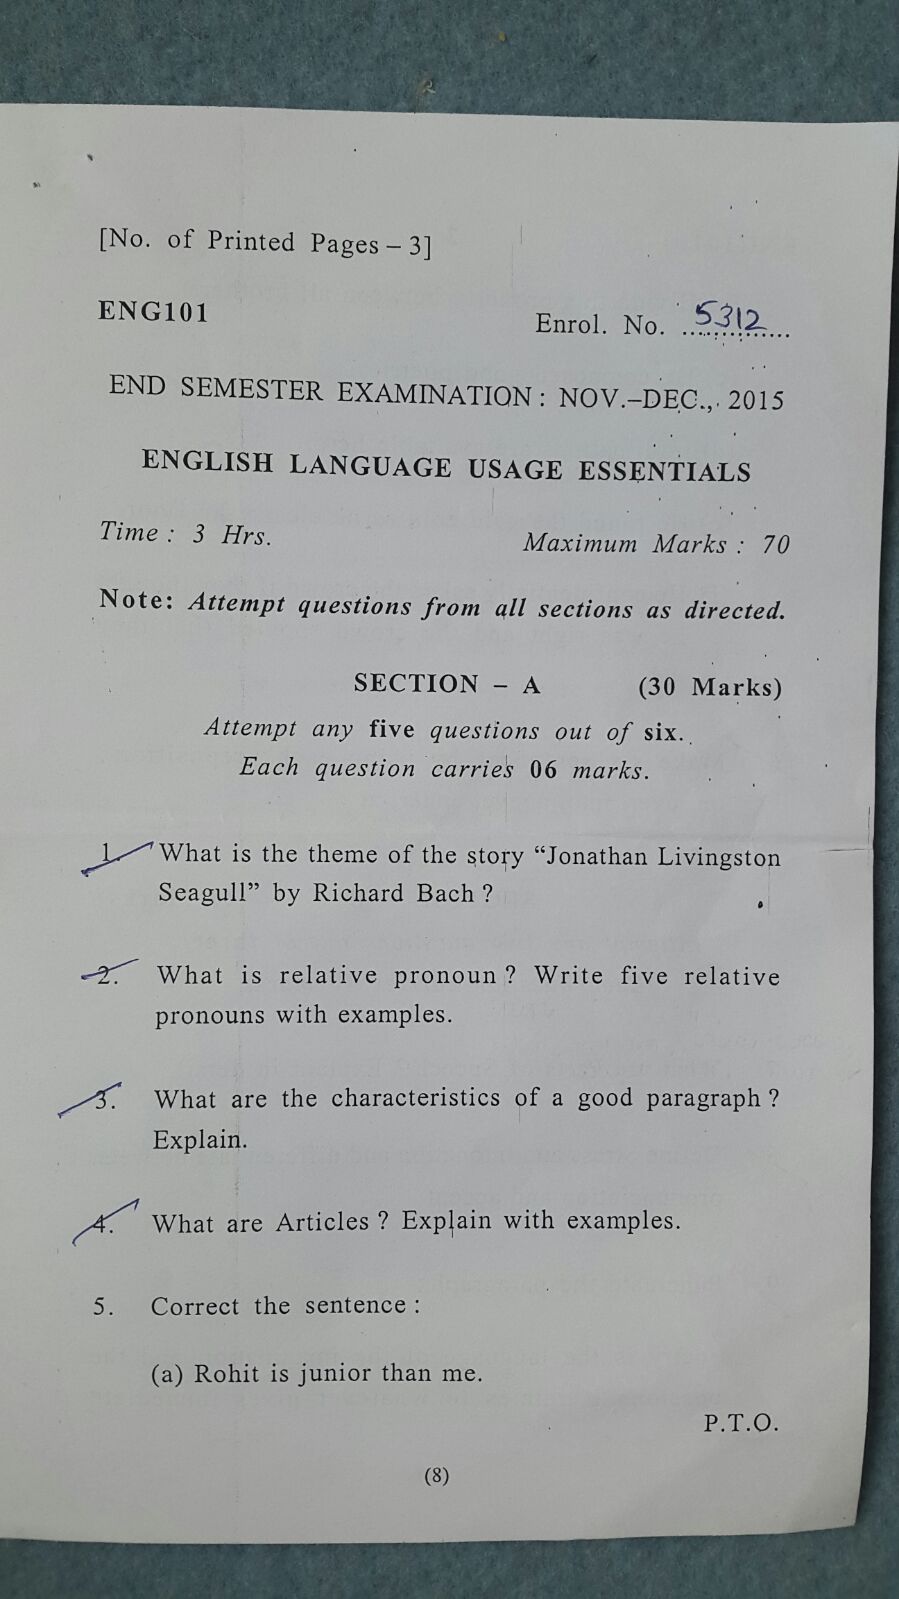 Amity english question paper for sem 1 aset-eng01.JPG